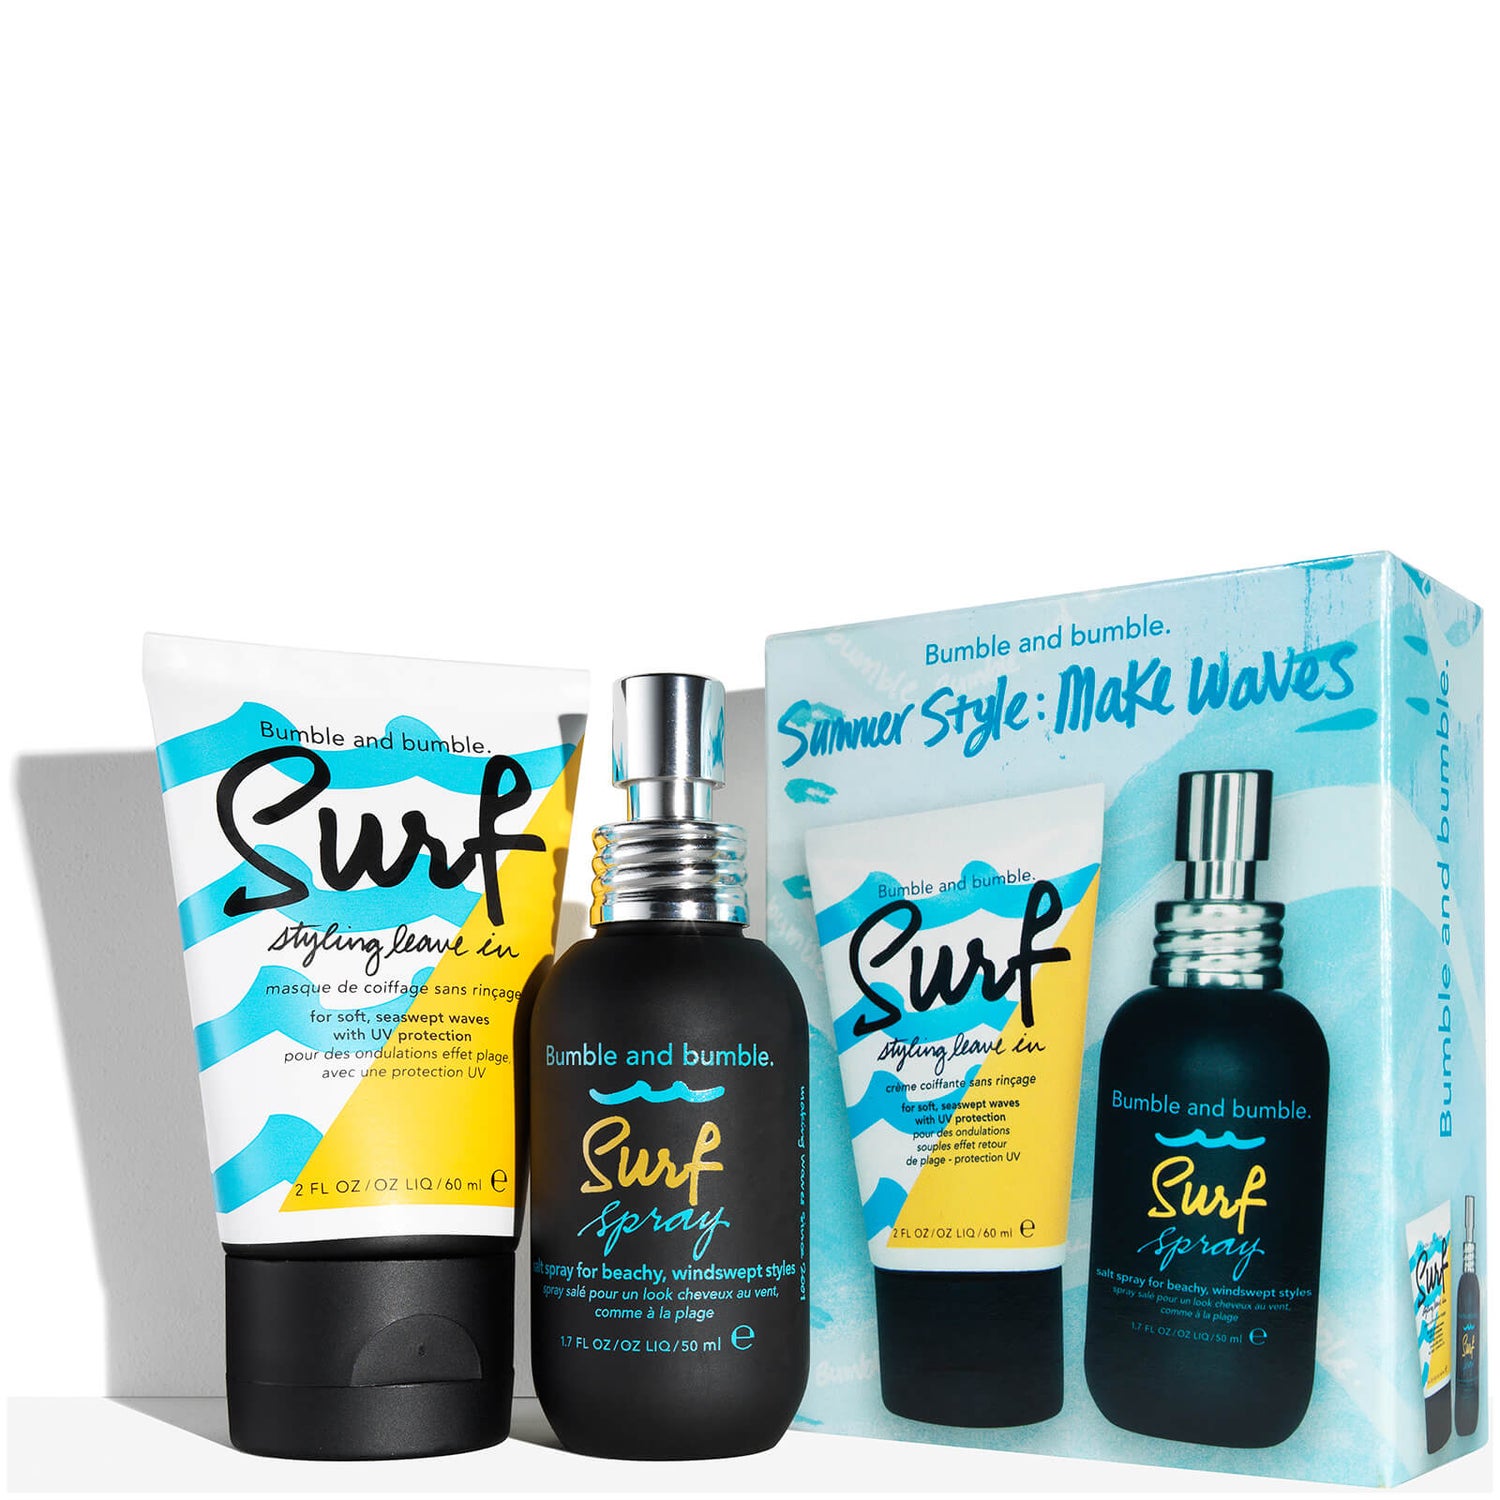 Bumble and bumble Surf Duo Summer Set